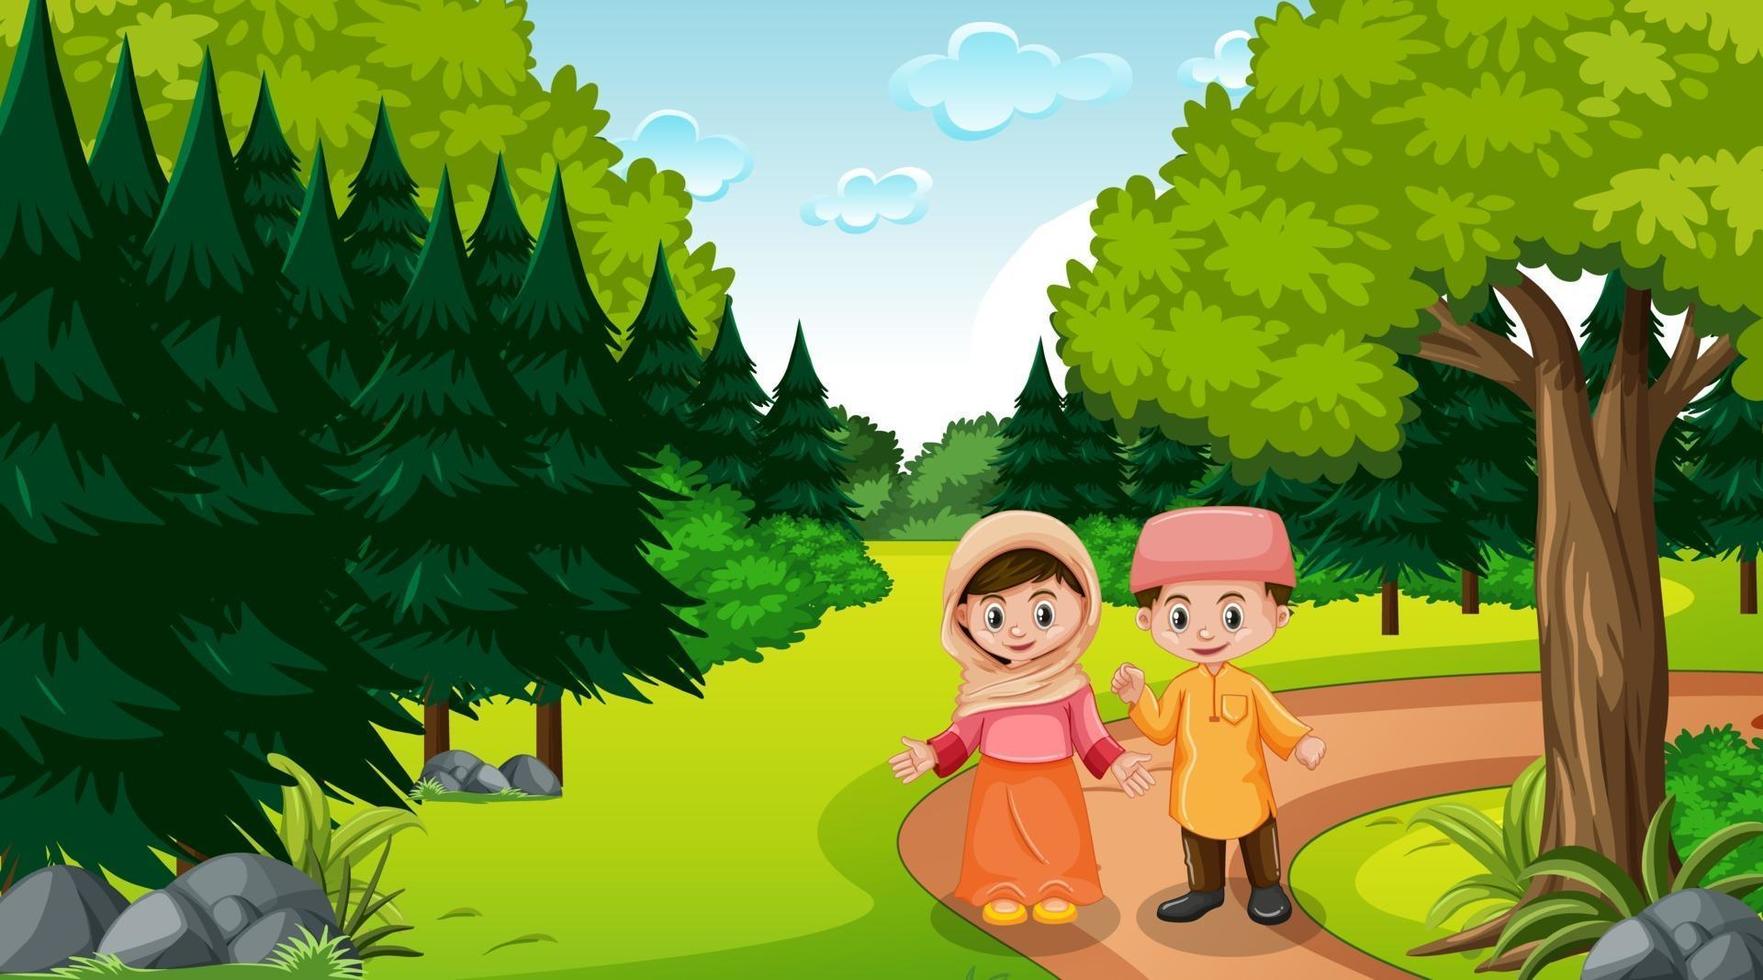 Muslim kids wears traditional clothes in the forest vector